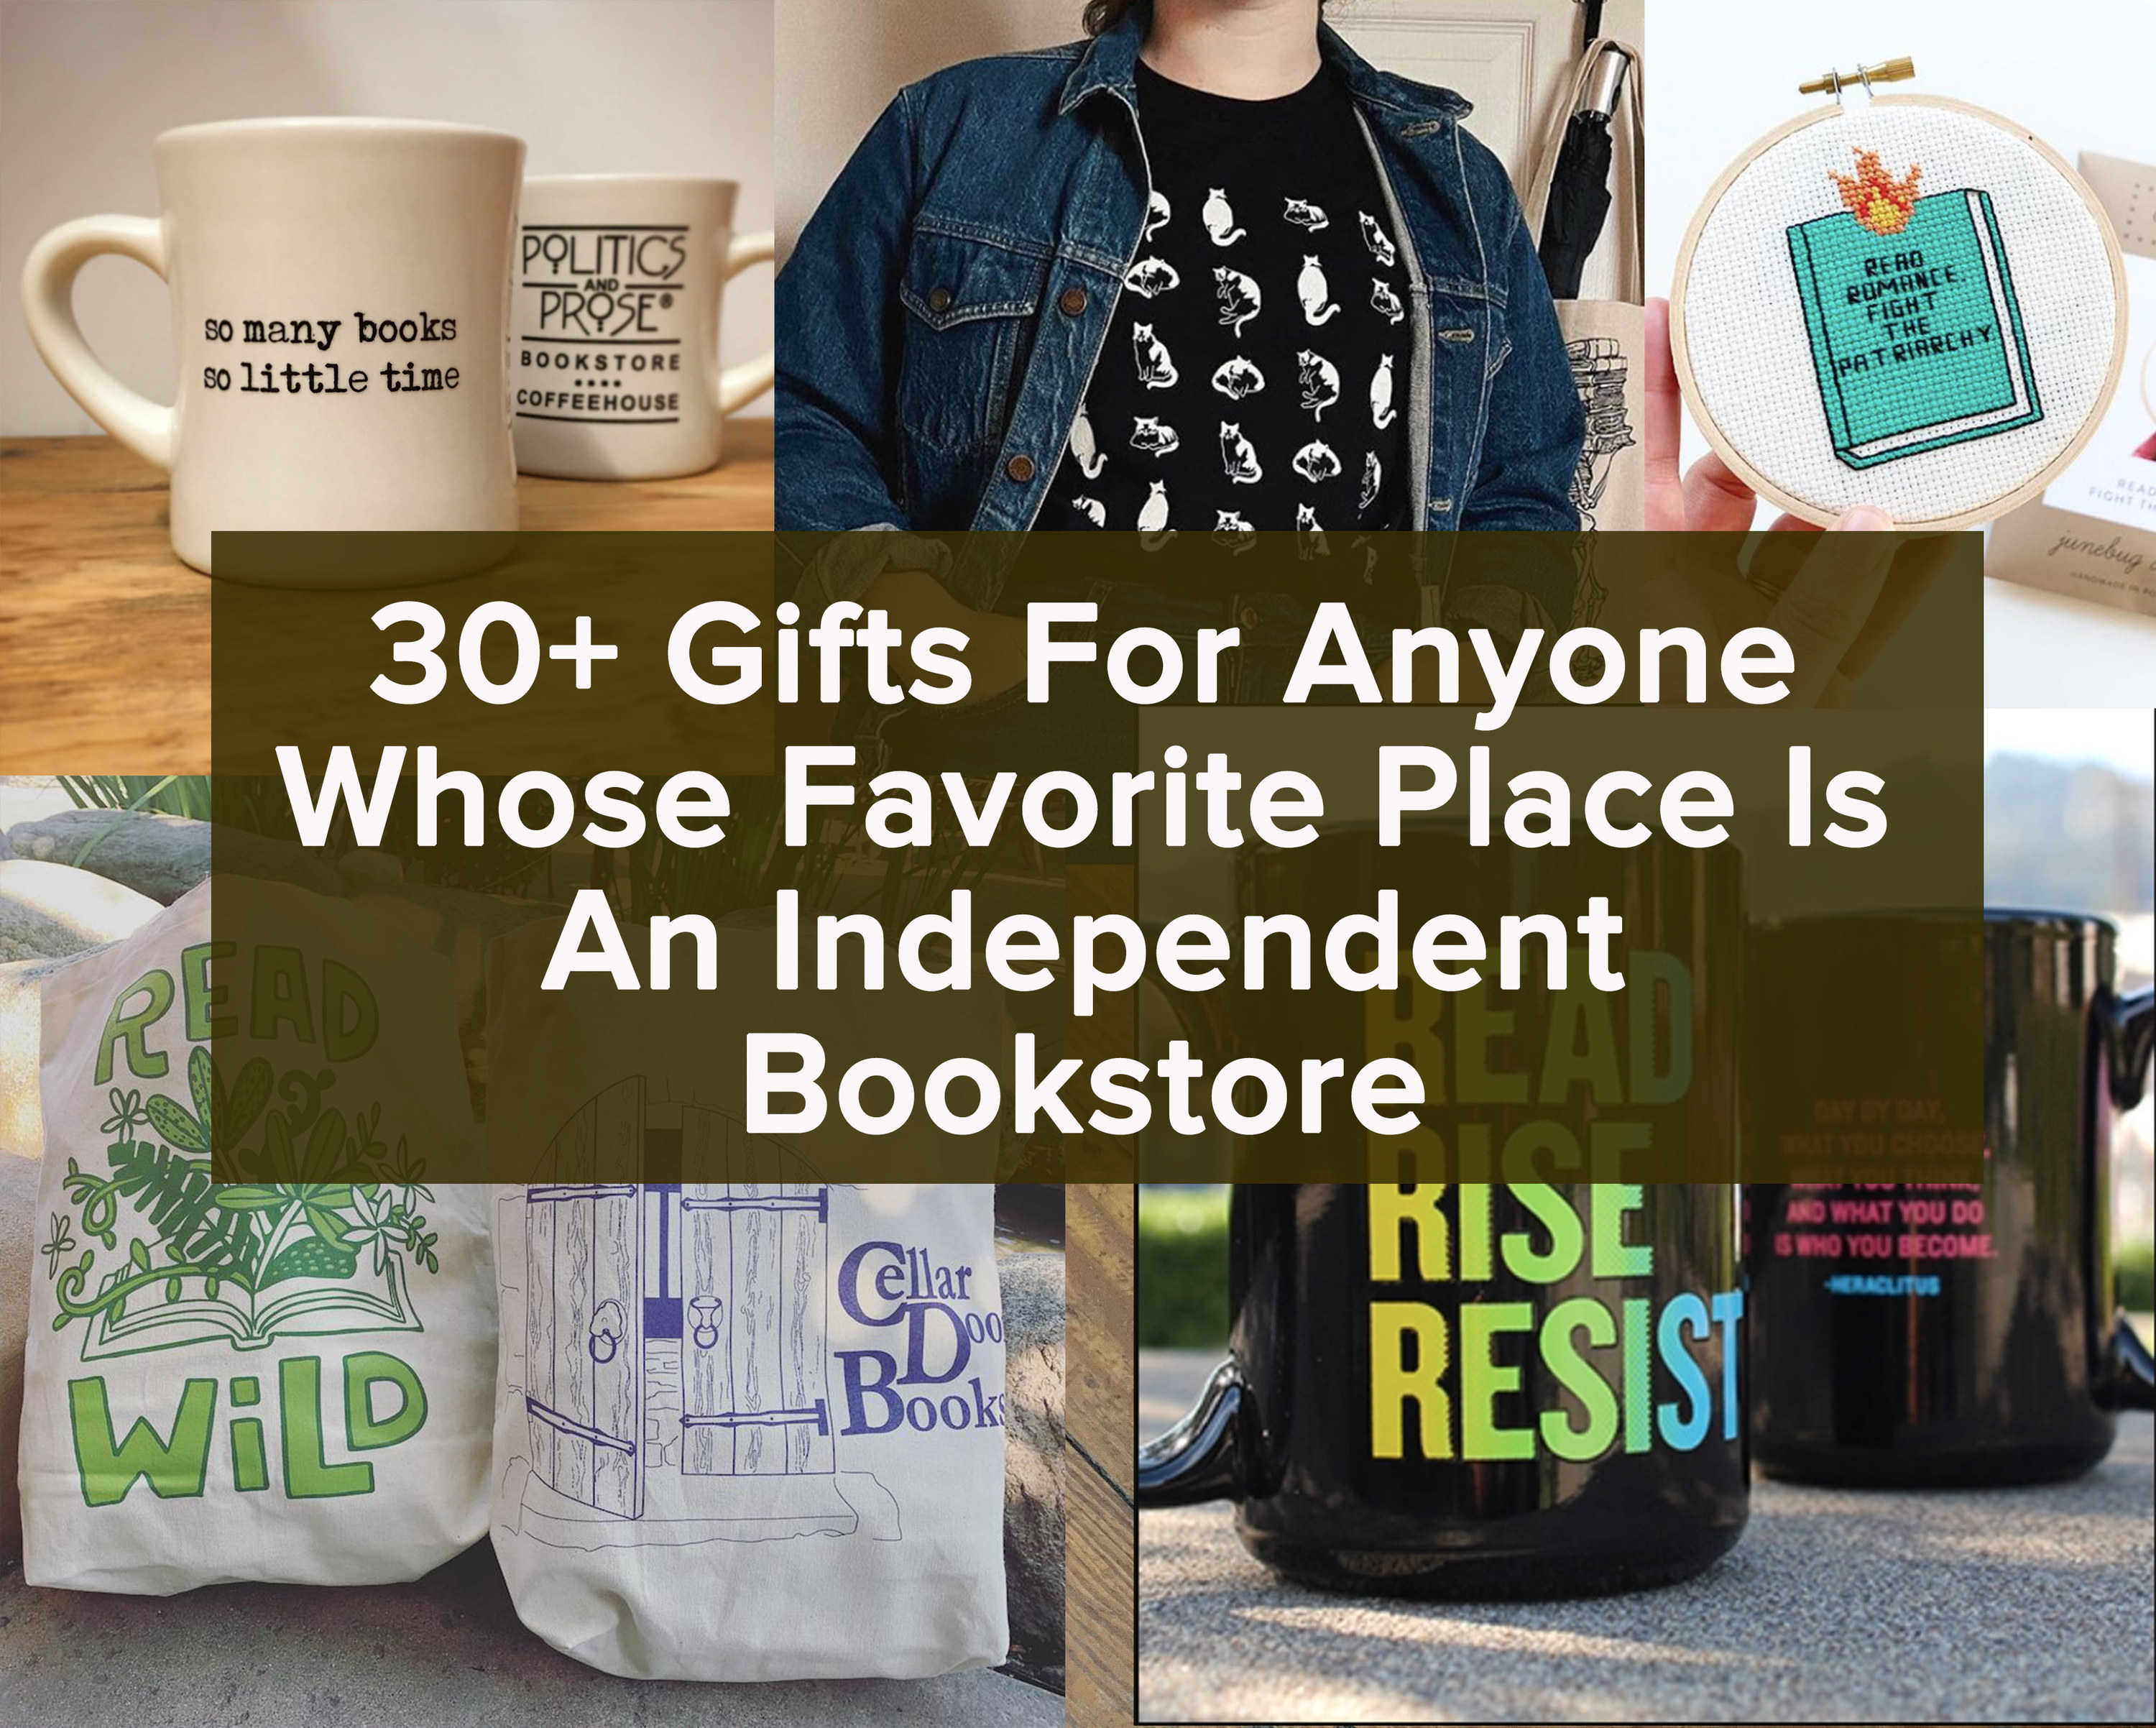 59 Gifts We're Wishing For This Year